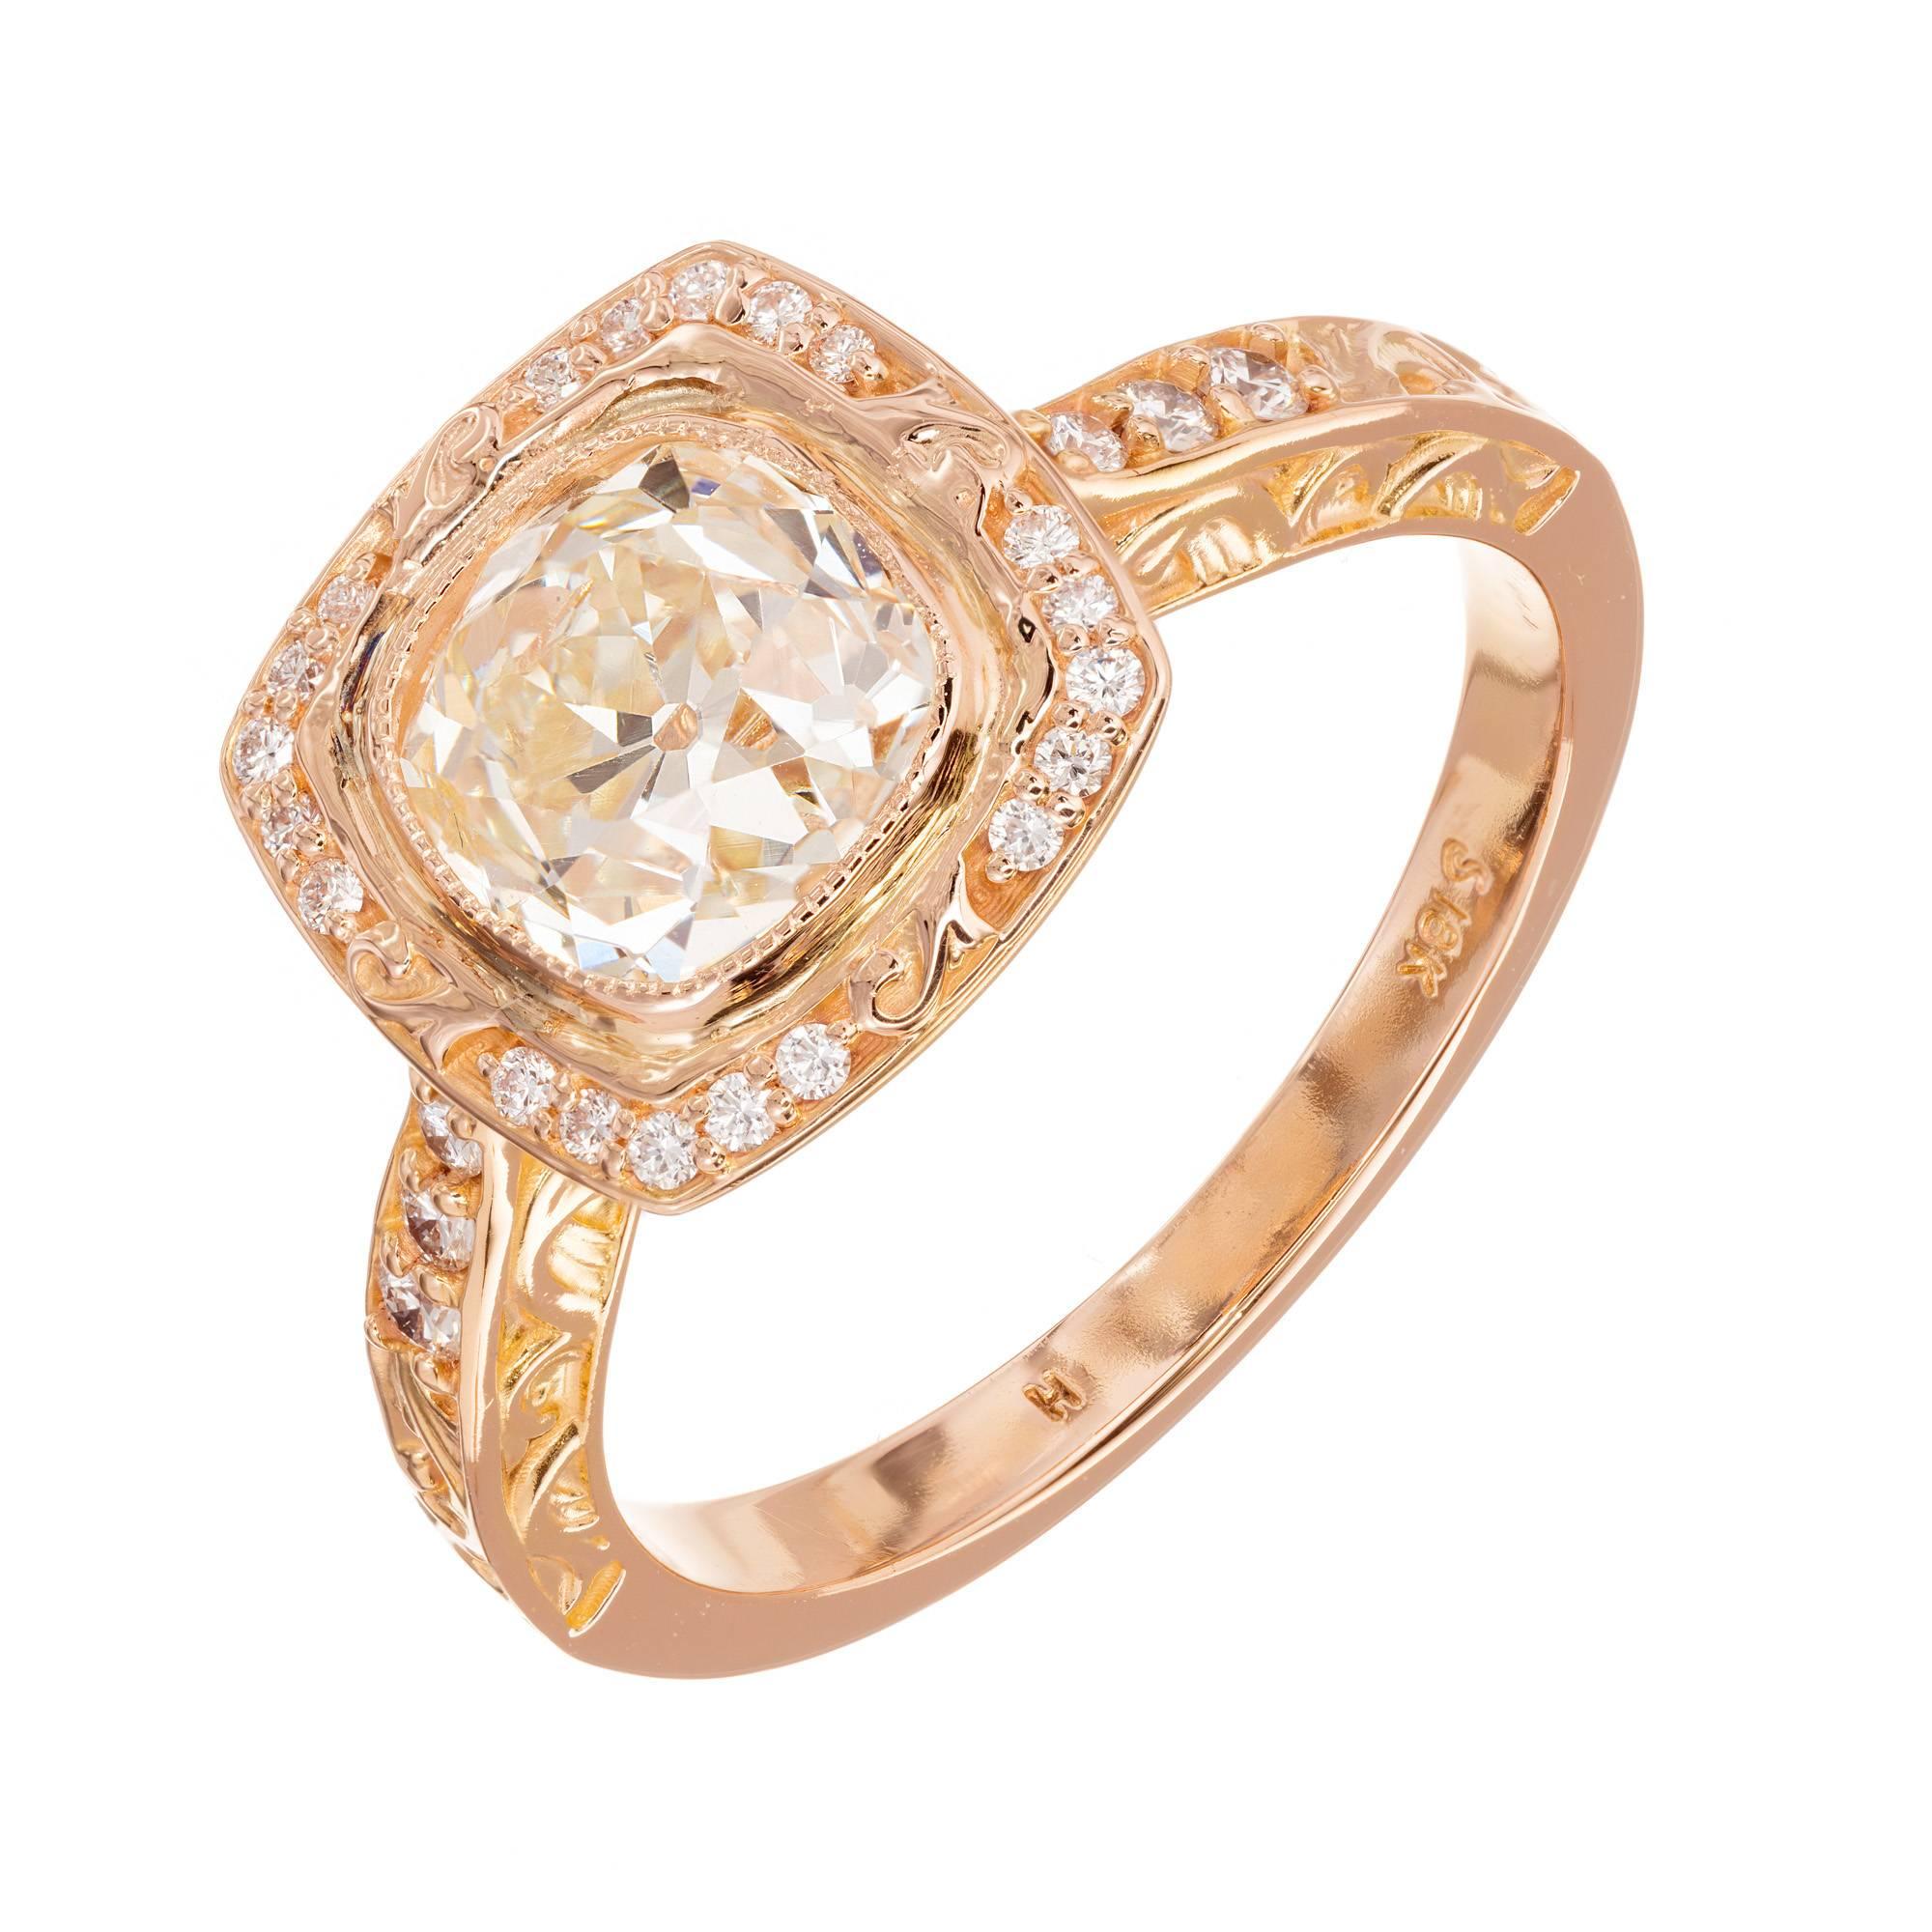 EGL Certified Peter Suchy 1.54 Carat Diamond Gold Halo Engagement Ring